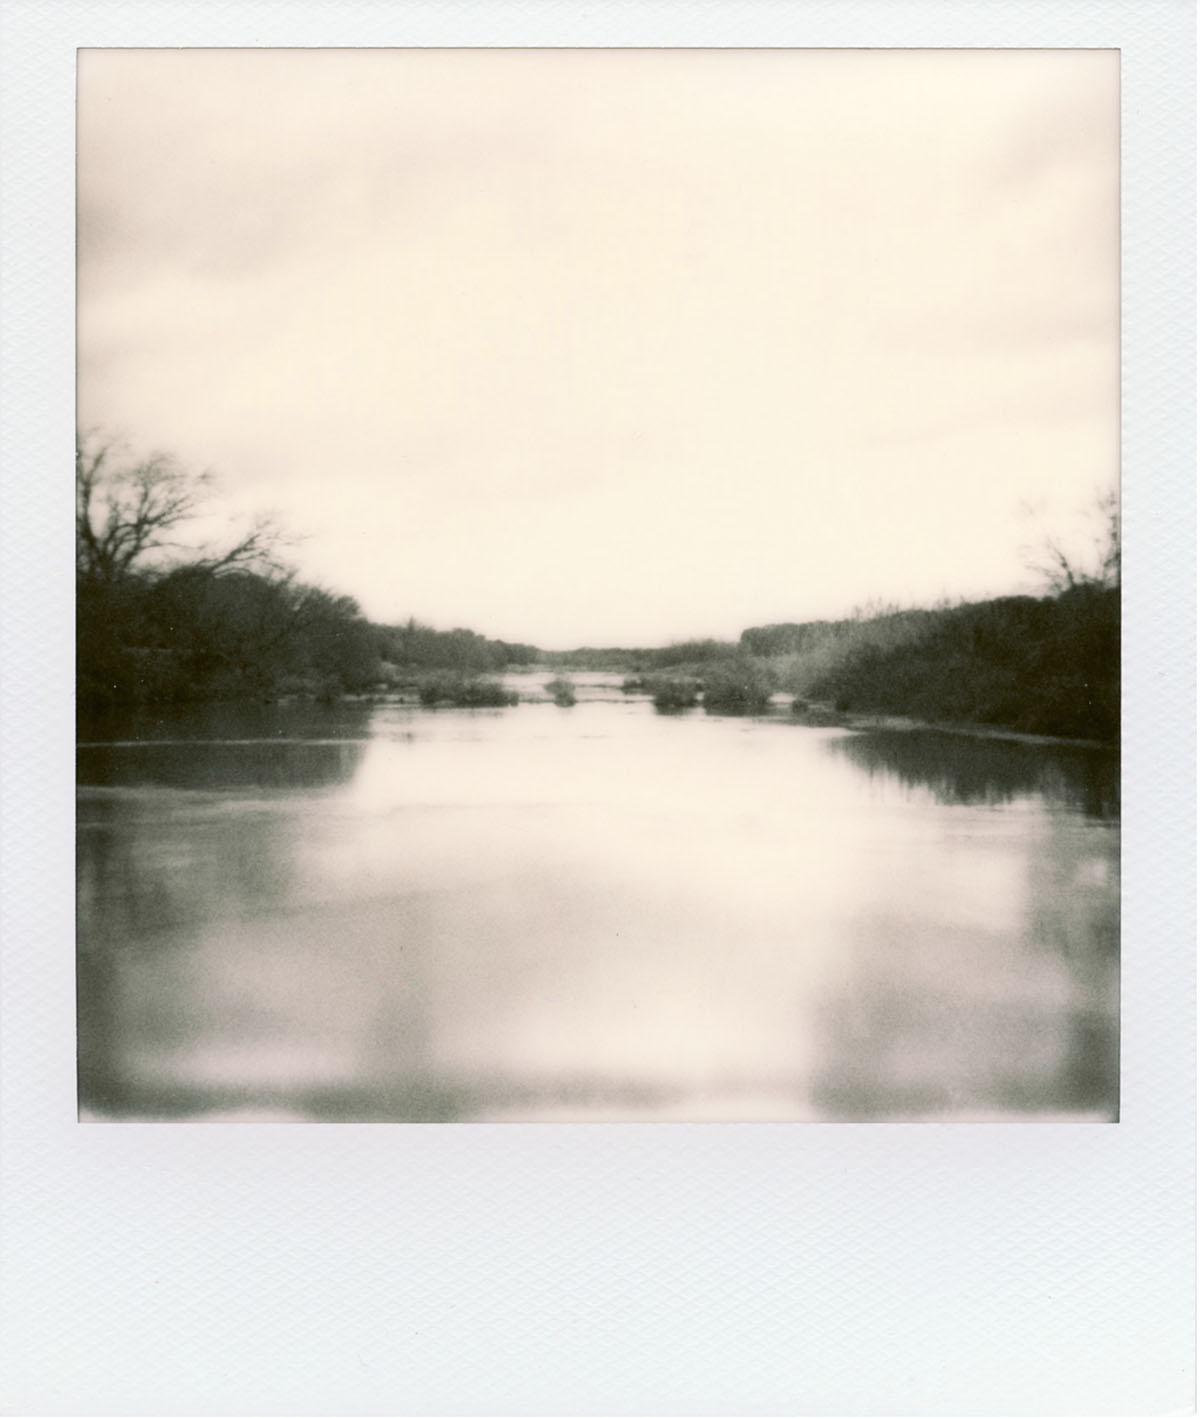 A Polaroid-style sepia tone picture of a body of water flanked by two grassy banks under a yellow-tone sky